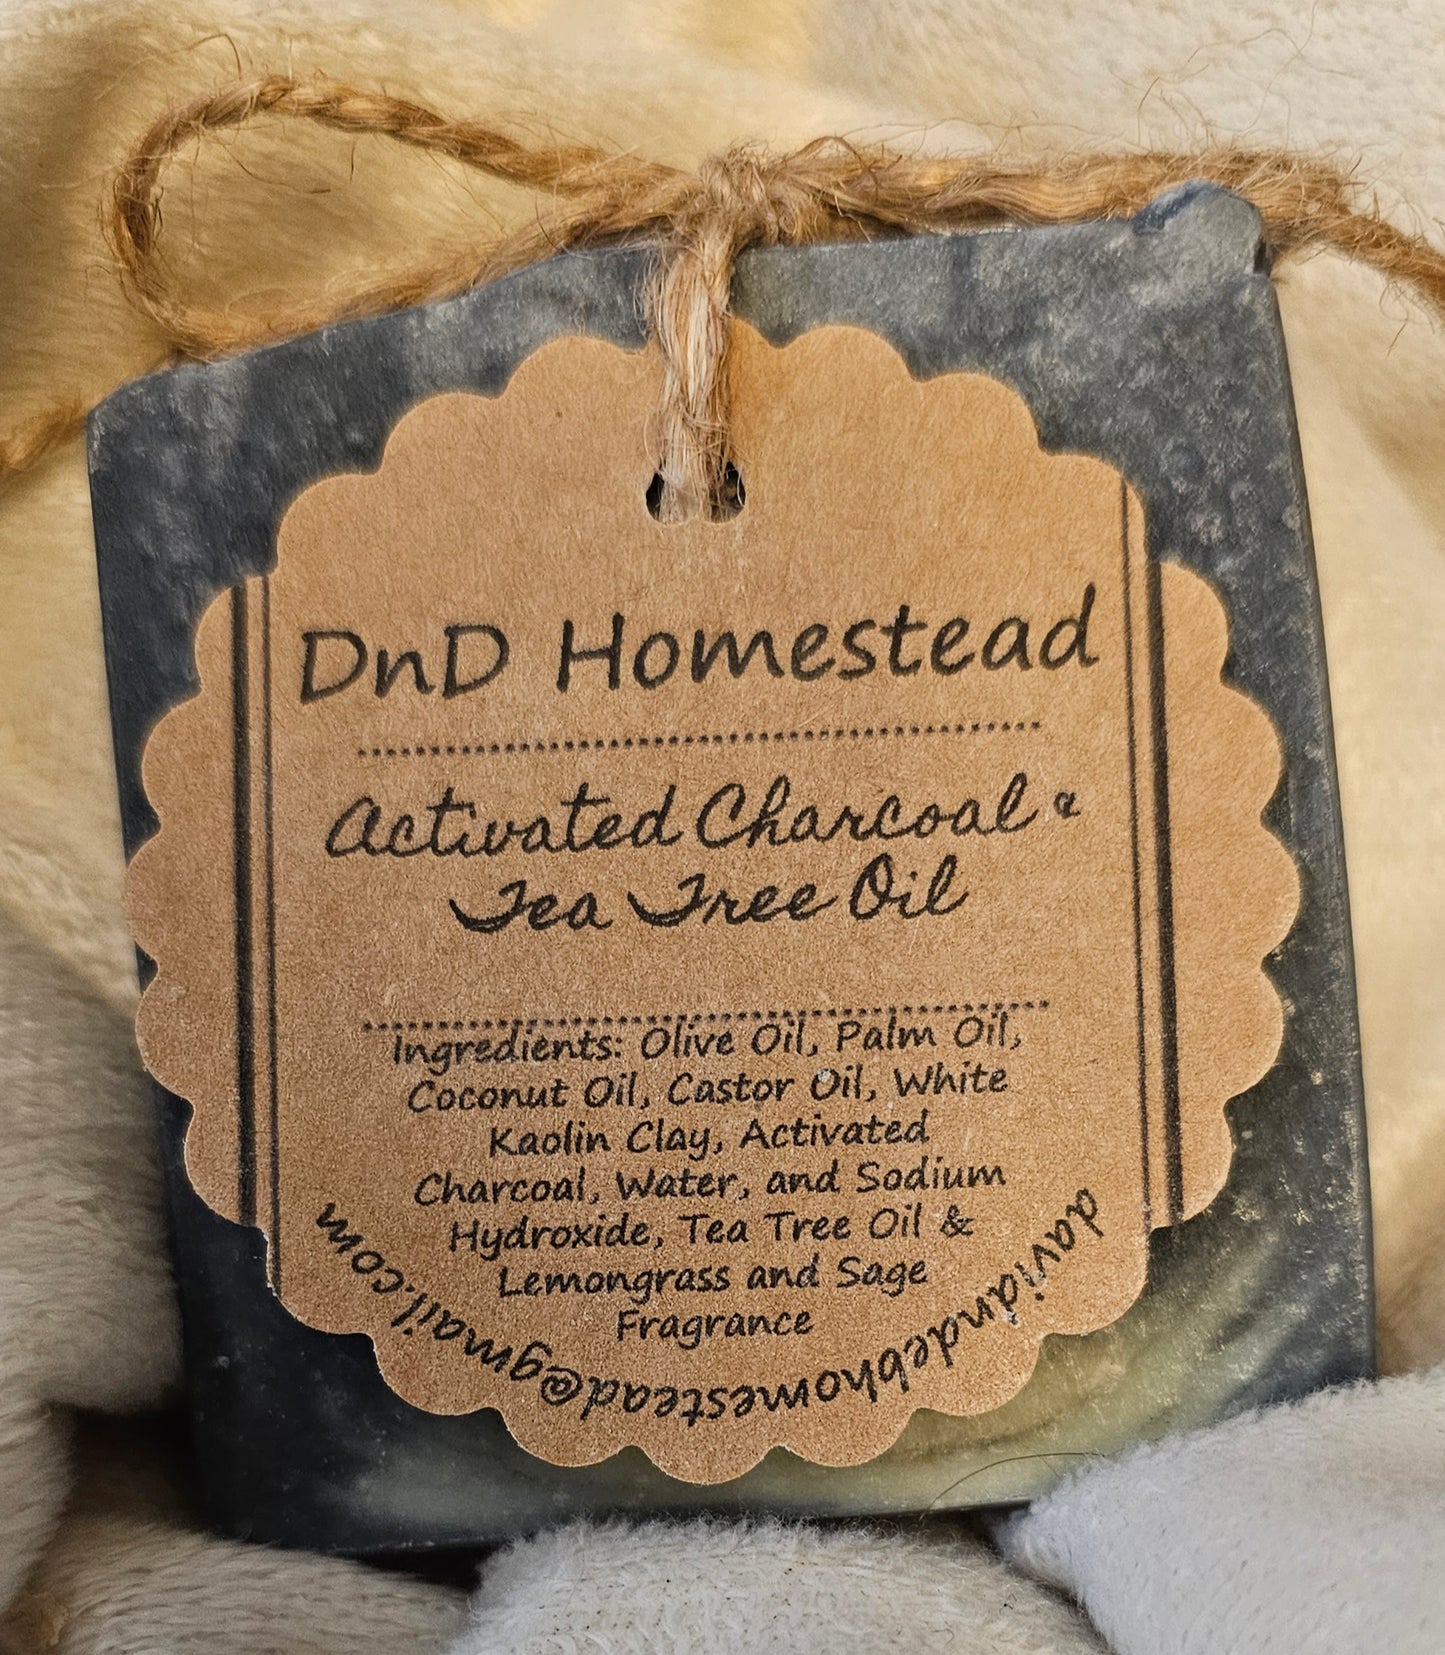 Activated Charcoal with Tea Tree Oil & Lemongrass & Sage Soap